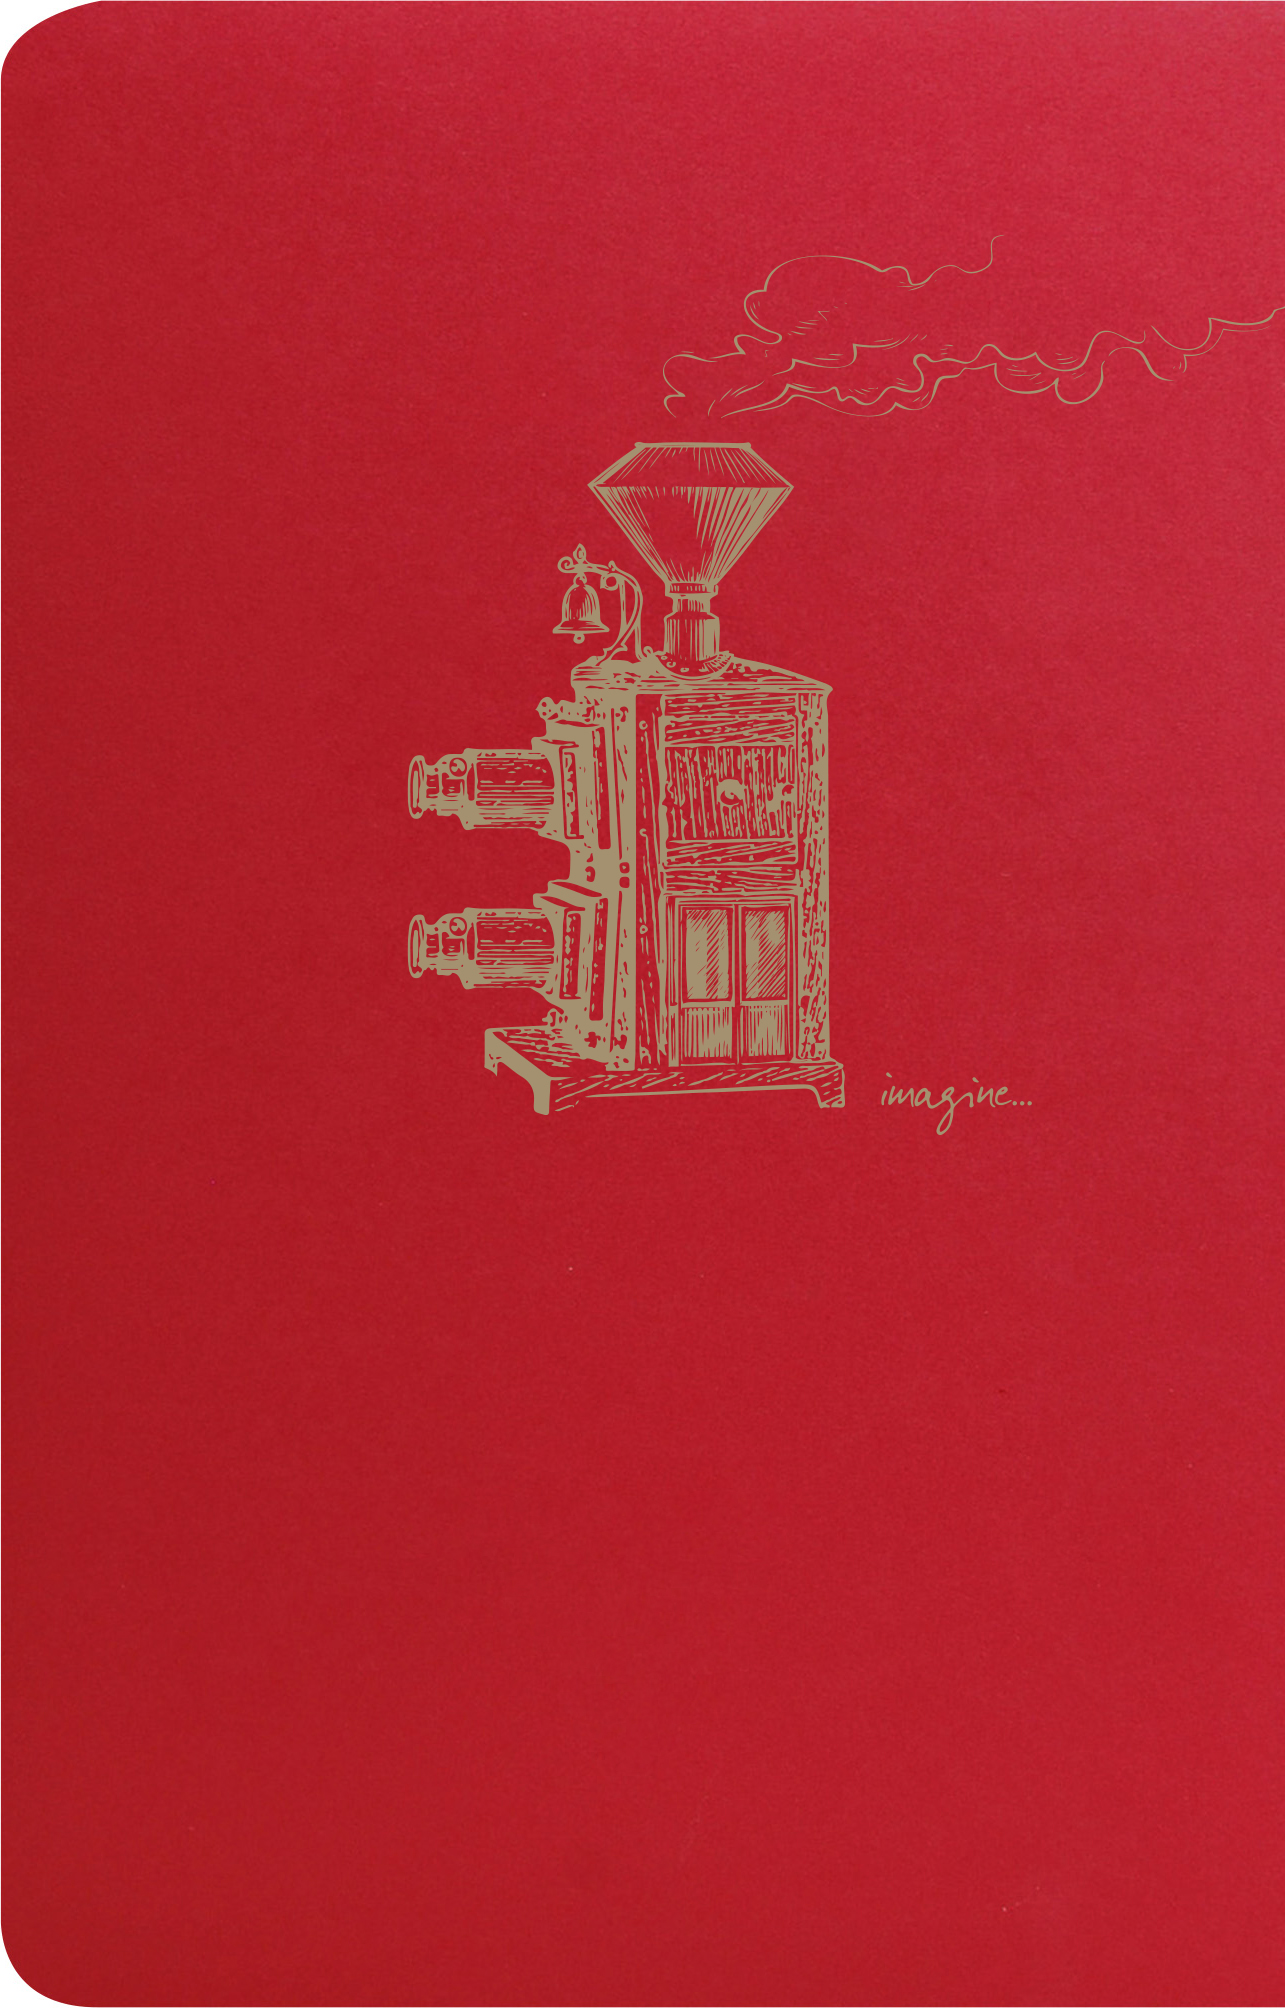 Clairefontaine Flying Spirit  7.5x12cm  - Red